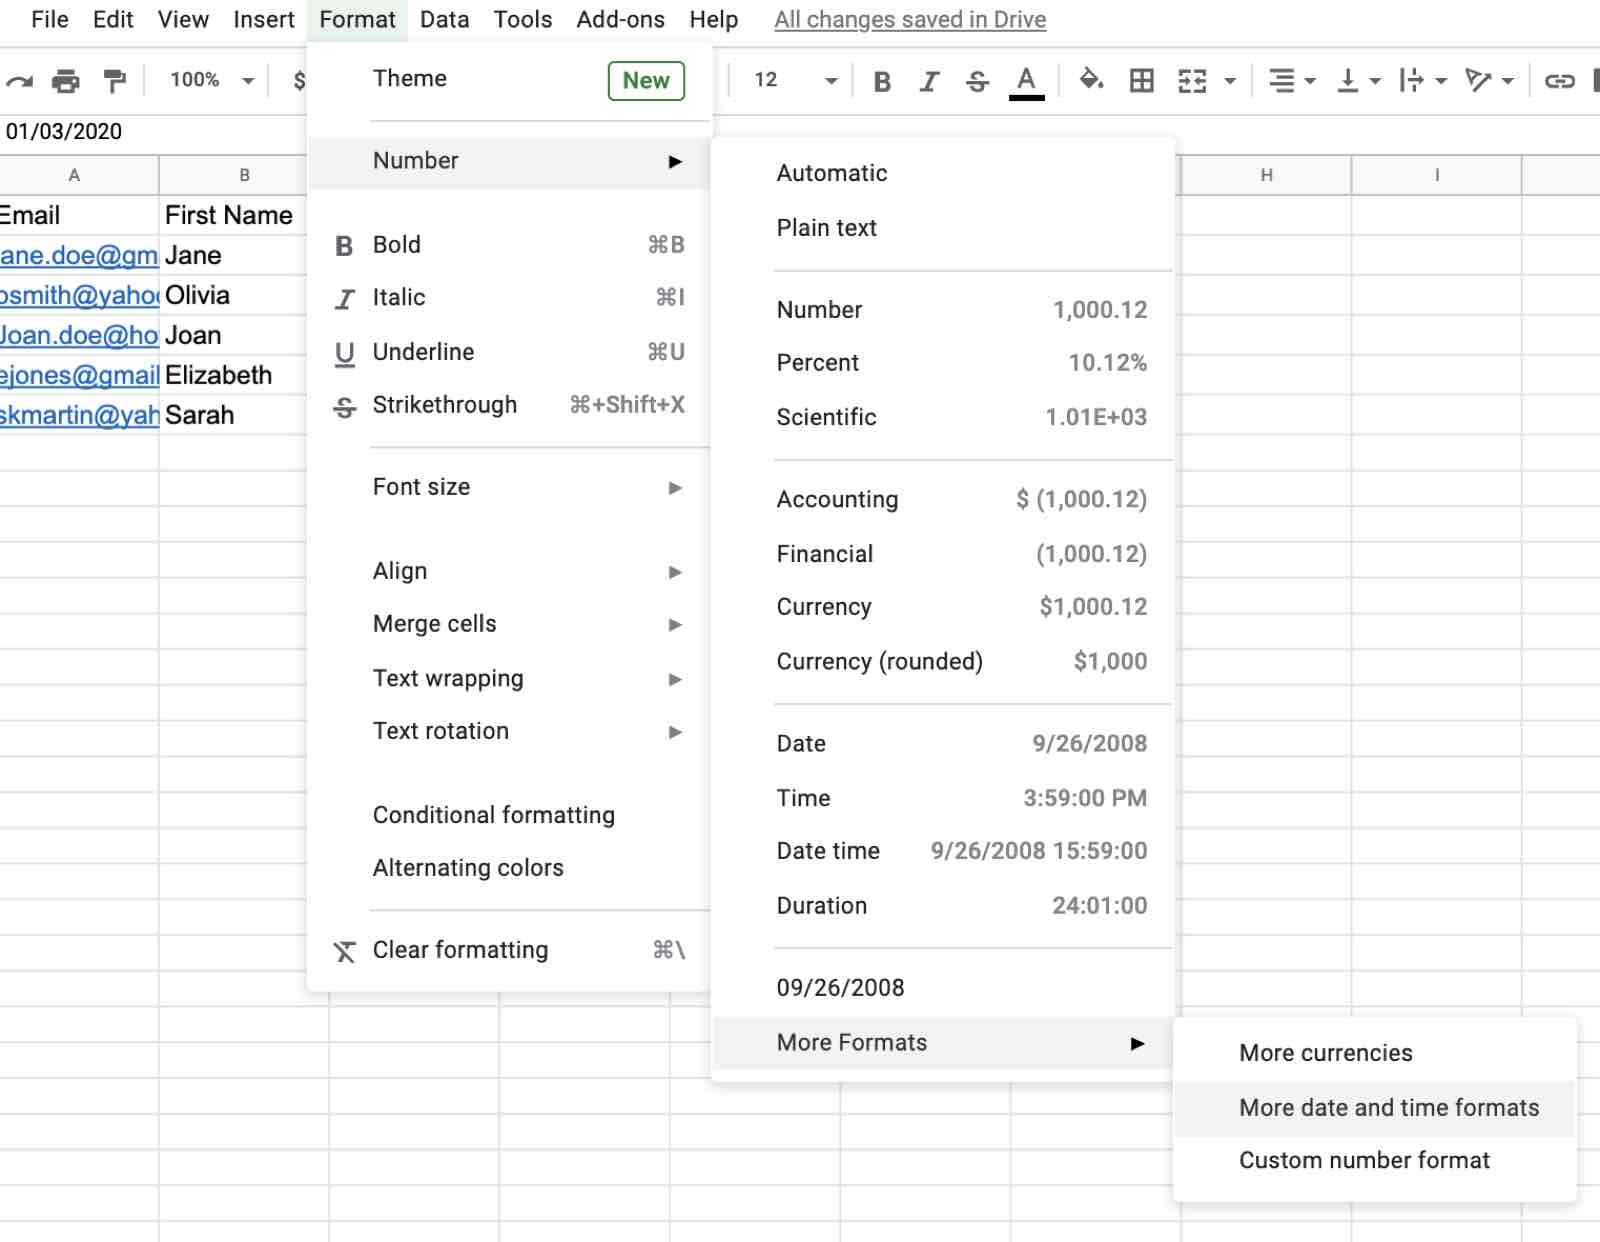 The option to further customize dates in Google Sheets